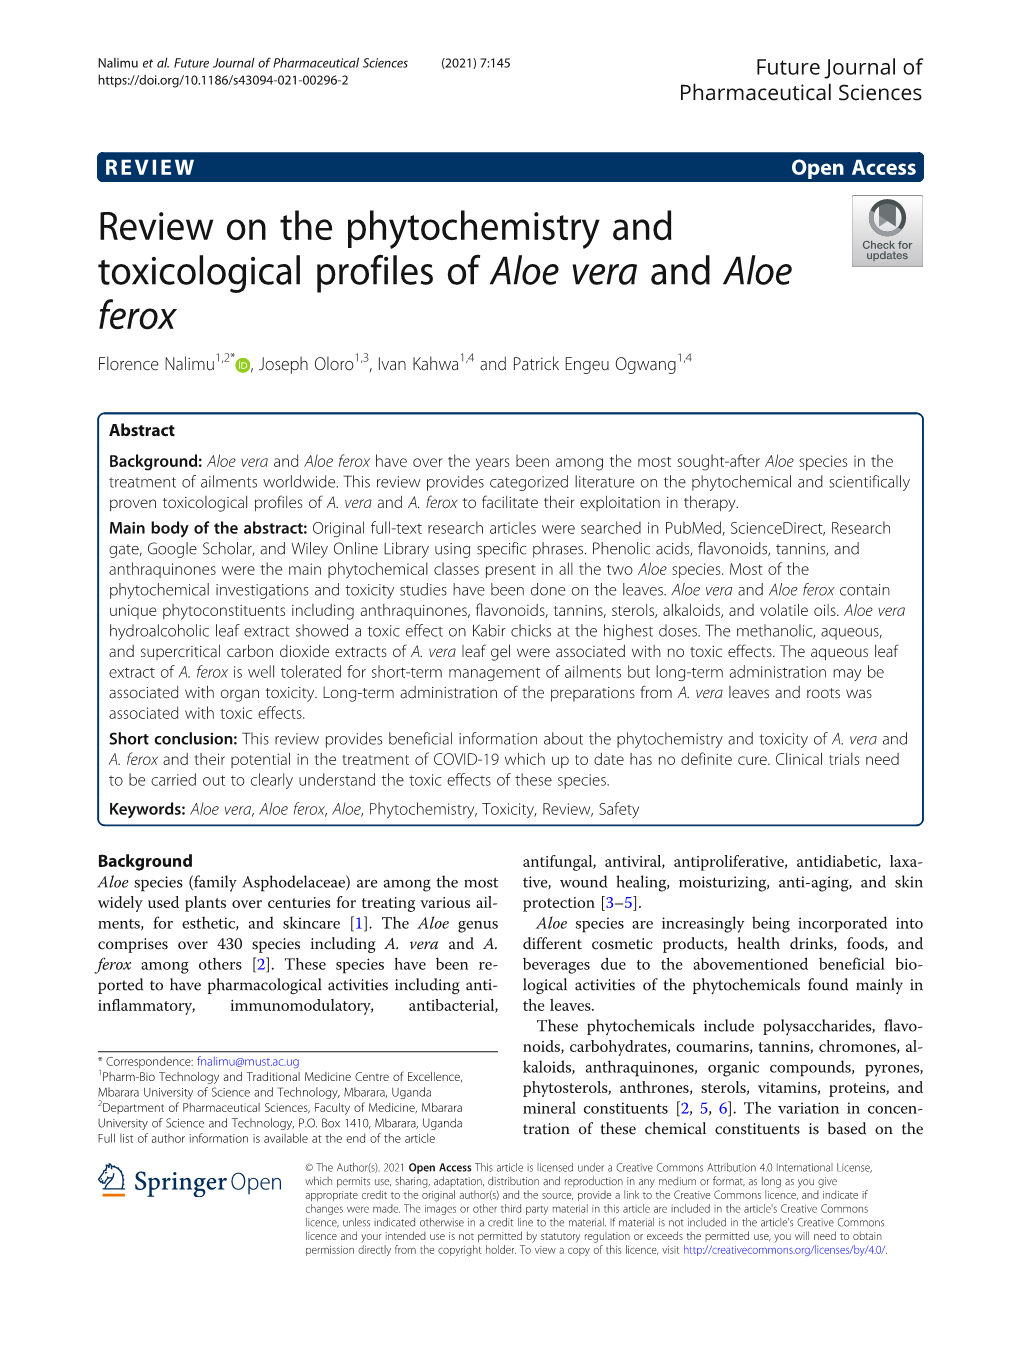 Review on the Phytochemistry and Toxicological Profiles of Aloe Vera and Aloe Ferox